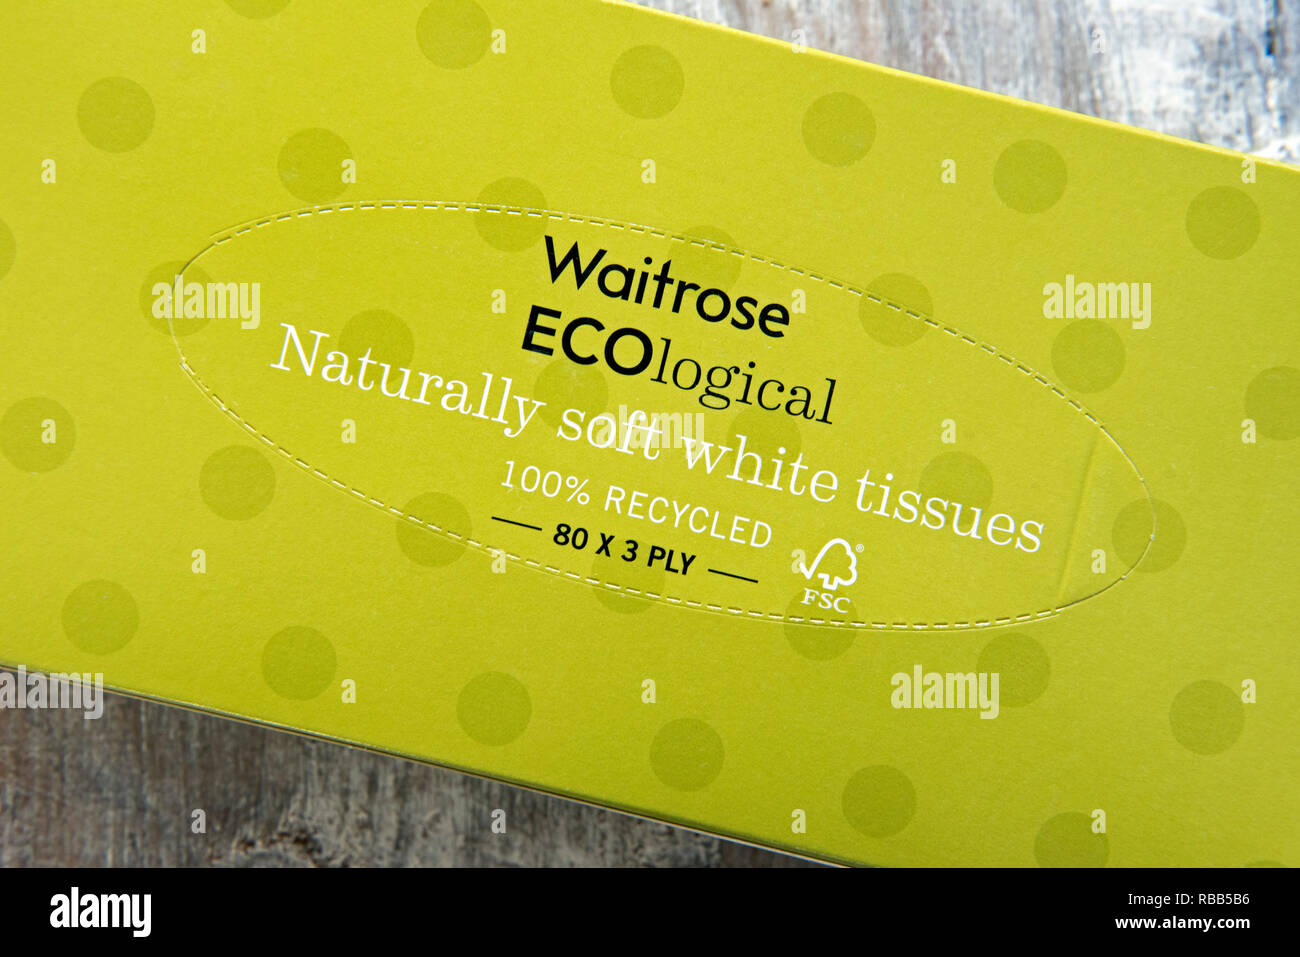 Box of Waitrose Ecological recycled paper handkerchiefs or tissues. Stock Photo